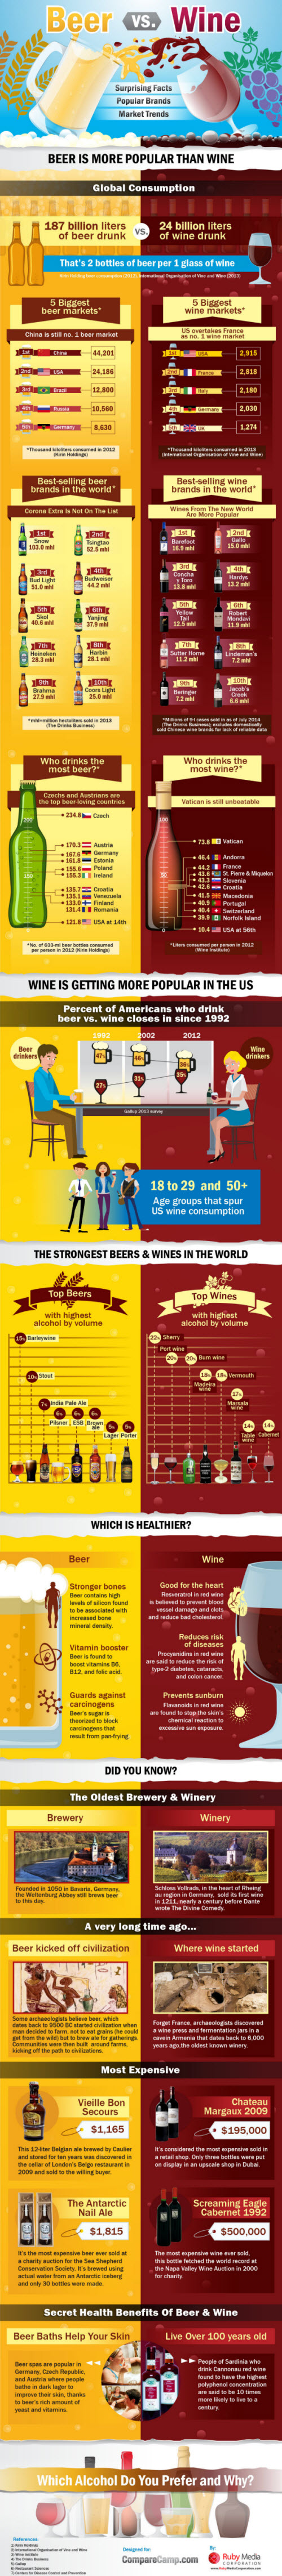 Beer and Wine Comparisons